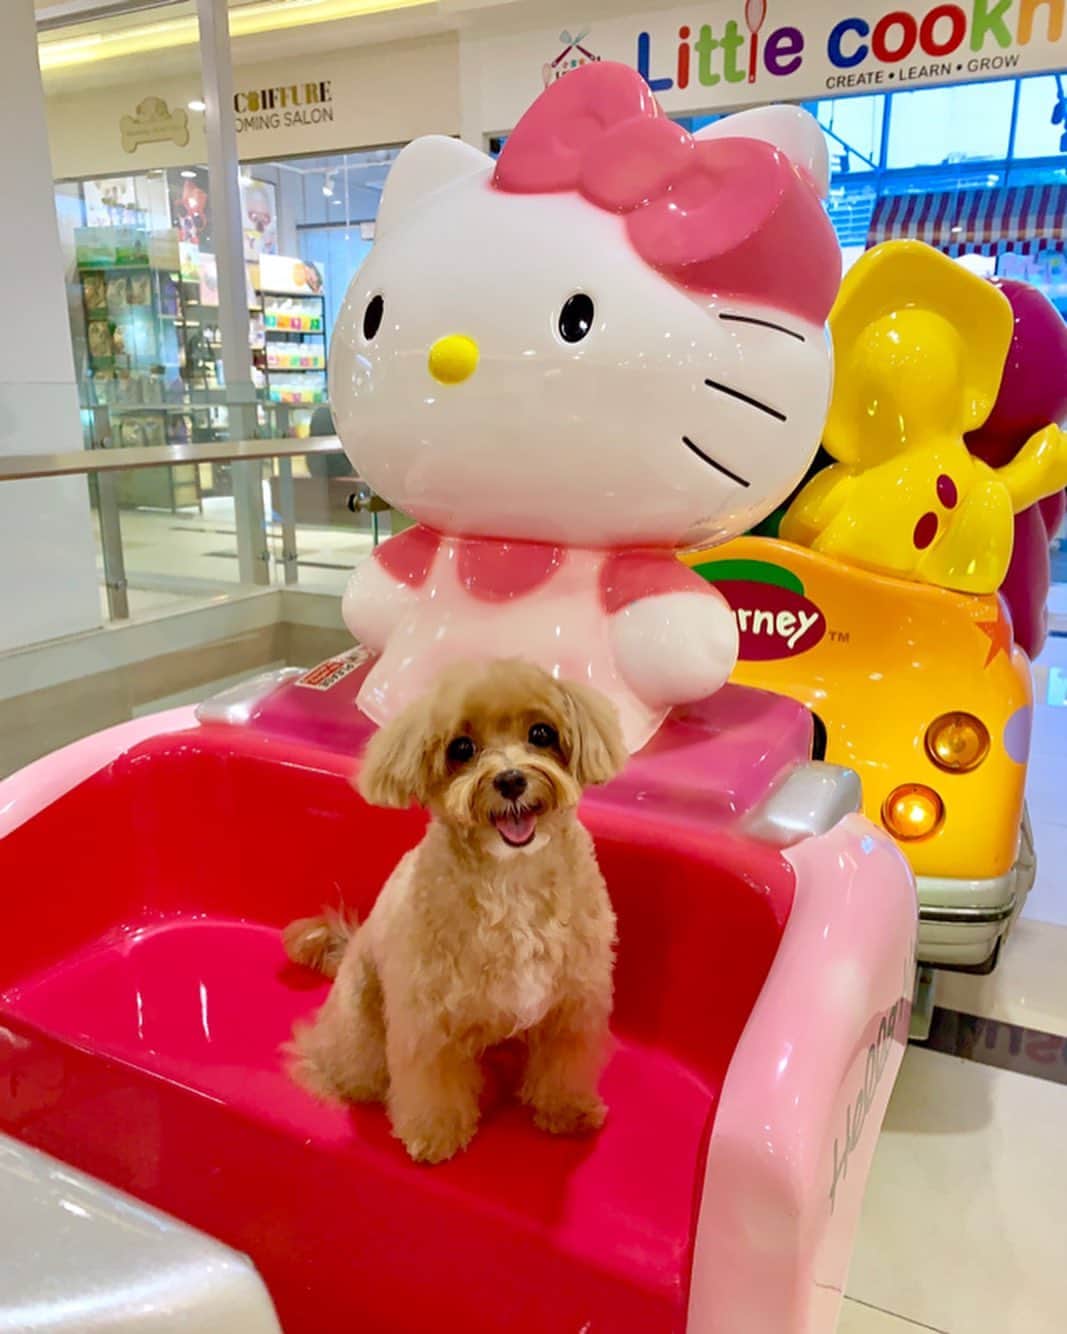 Ⓜ️їк◎ みこ 미코 ? Dogsのインスタグラム：「Hi 👋🏻 my dearest Insta furiends, long time no see ya, hope you still remember me 😝  Have a pawderful week ahead 🥰😘 Just had my haircut 💇🏼 at @k9coiffuregrooming  お久しぶりですね。お元気ですか❓ 여러분 오랜만이에요。어떻게 잘 지내세요❓ . 📆 29 July 2019 . #maltipoosofinstagram #dogs #barkhappy #maltipoo #maltese #toypoodle #ワンコ #わんこ #犬 #いぬ #トイプードル #dogsoftheday #poodlesofficial #poodle #puppylove #petfancy#furball #sgpet #poodleclub #poodleclubsg #furbabies #furballs #puppiesforall #pawsomepoodles #singaporedogs #개 #푸들 #괴엽다」